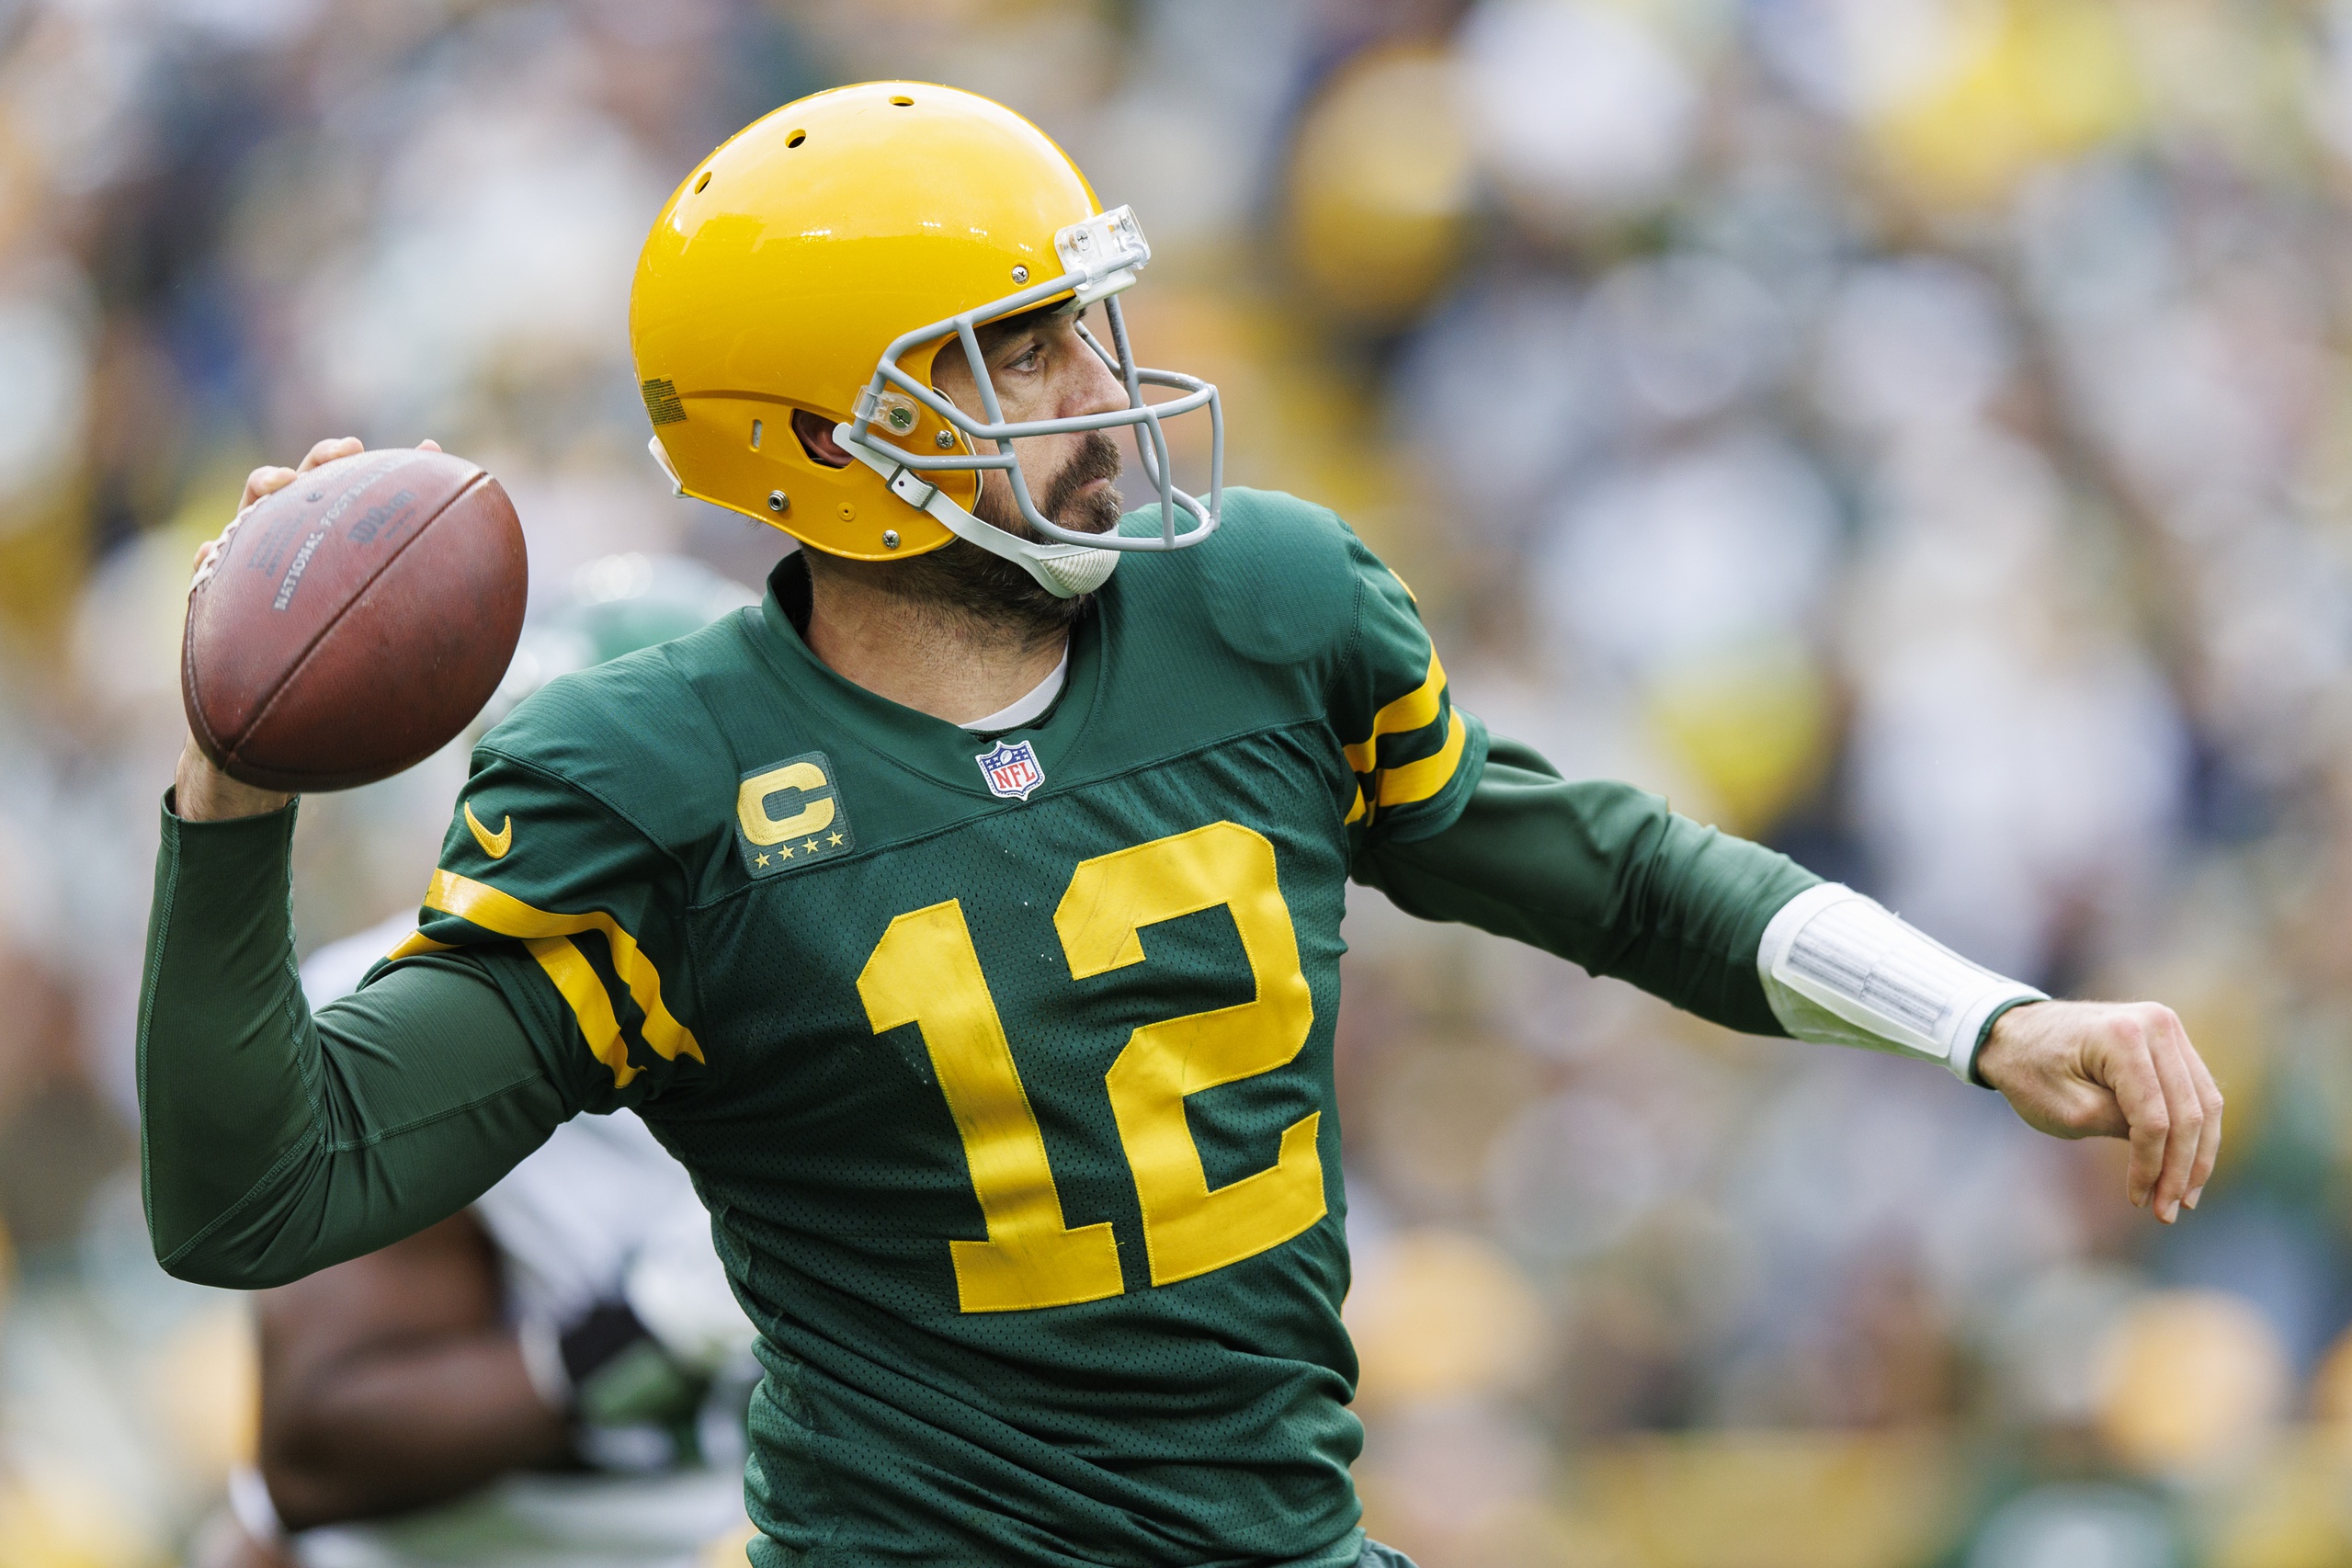 Complete game remains elusive for Packers